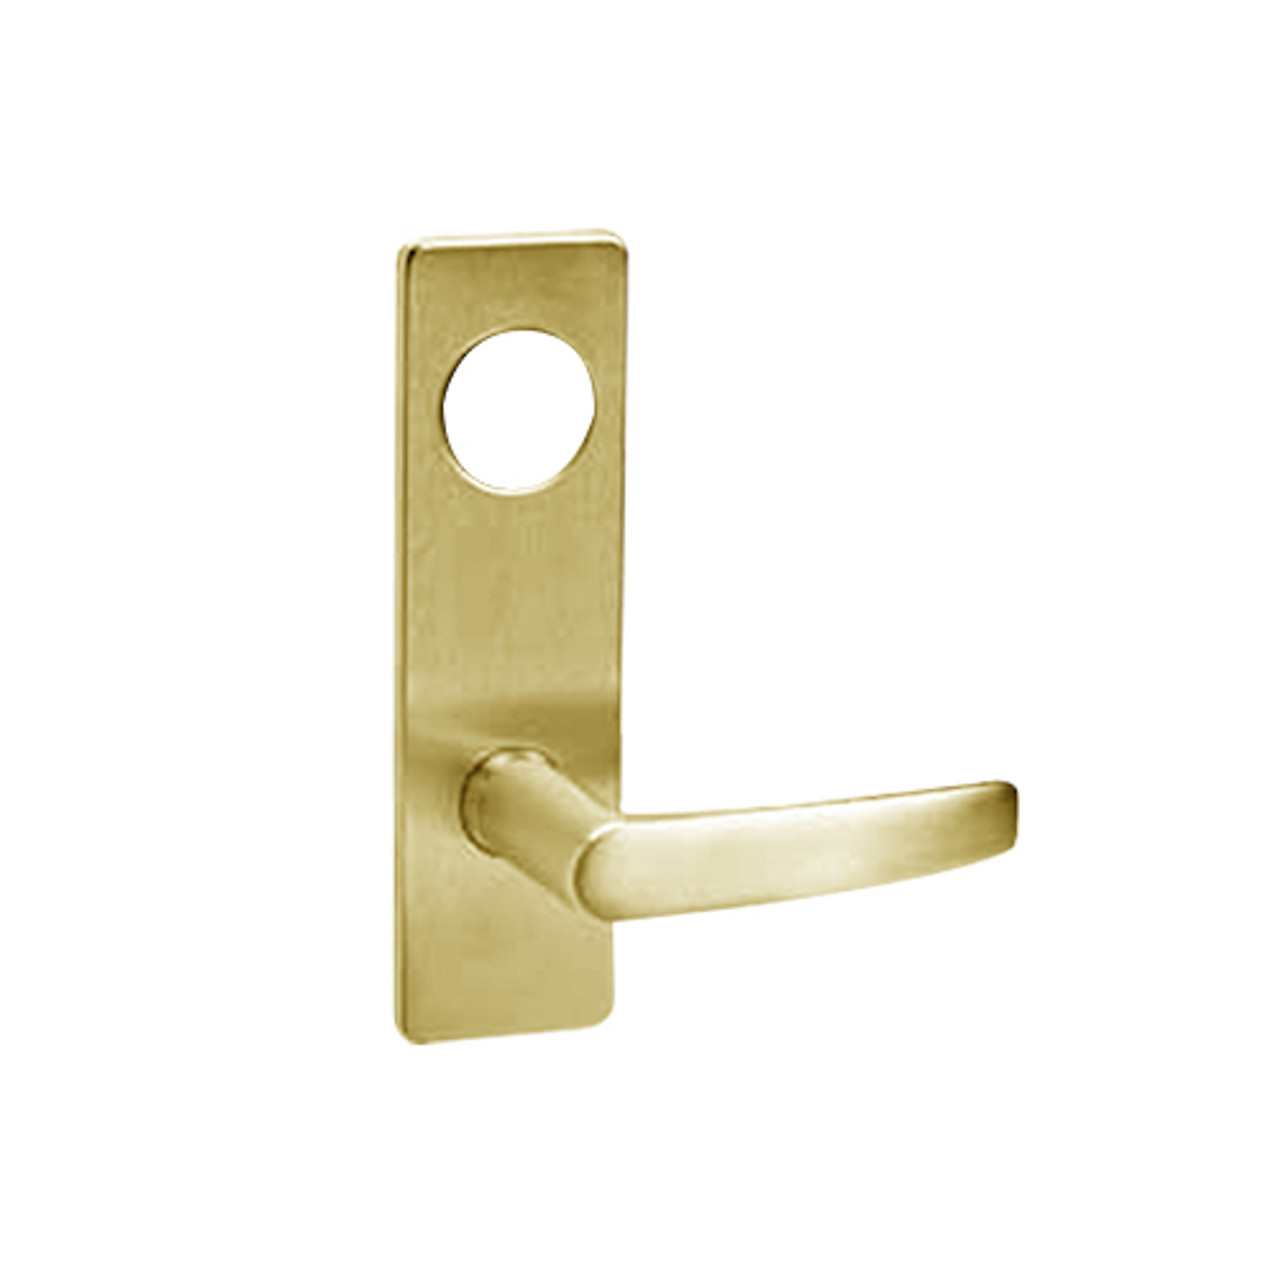 ML2051-ASM-605-LC Corbin Russwin ML2000 Series Mortise Office Locksets with Armstrong Lever in Bright Brass